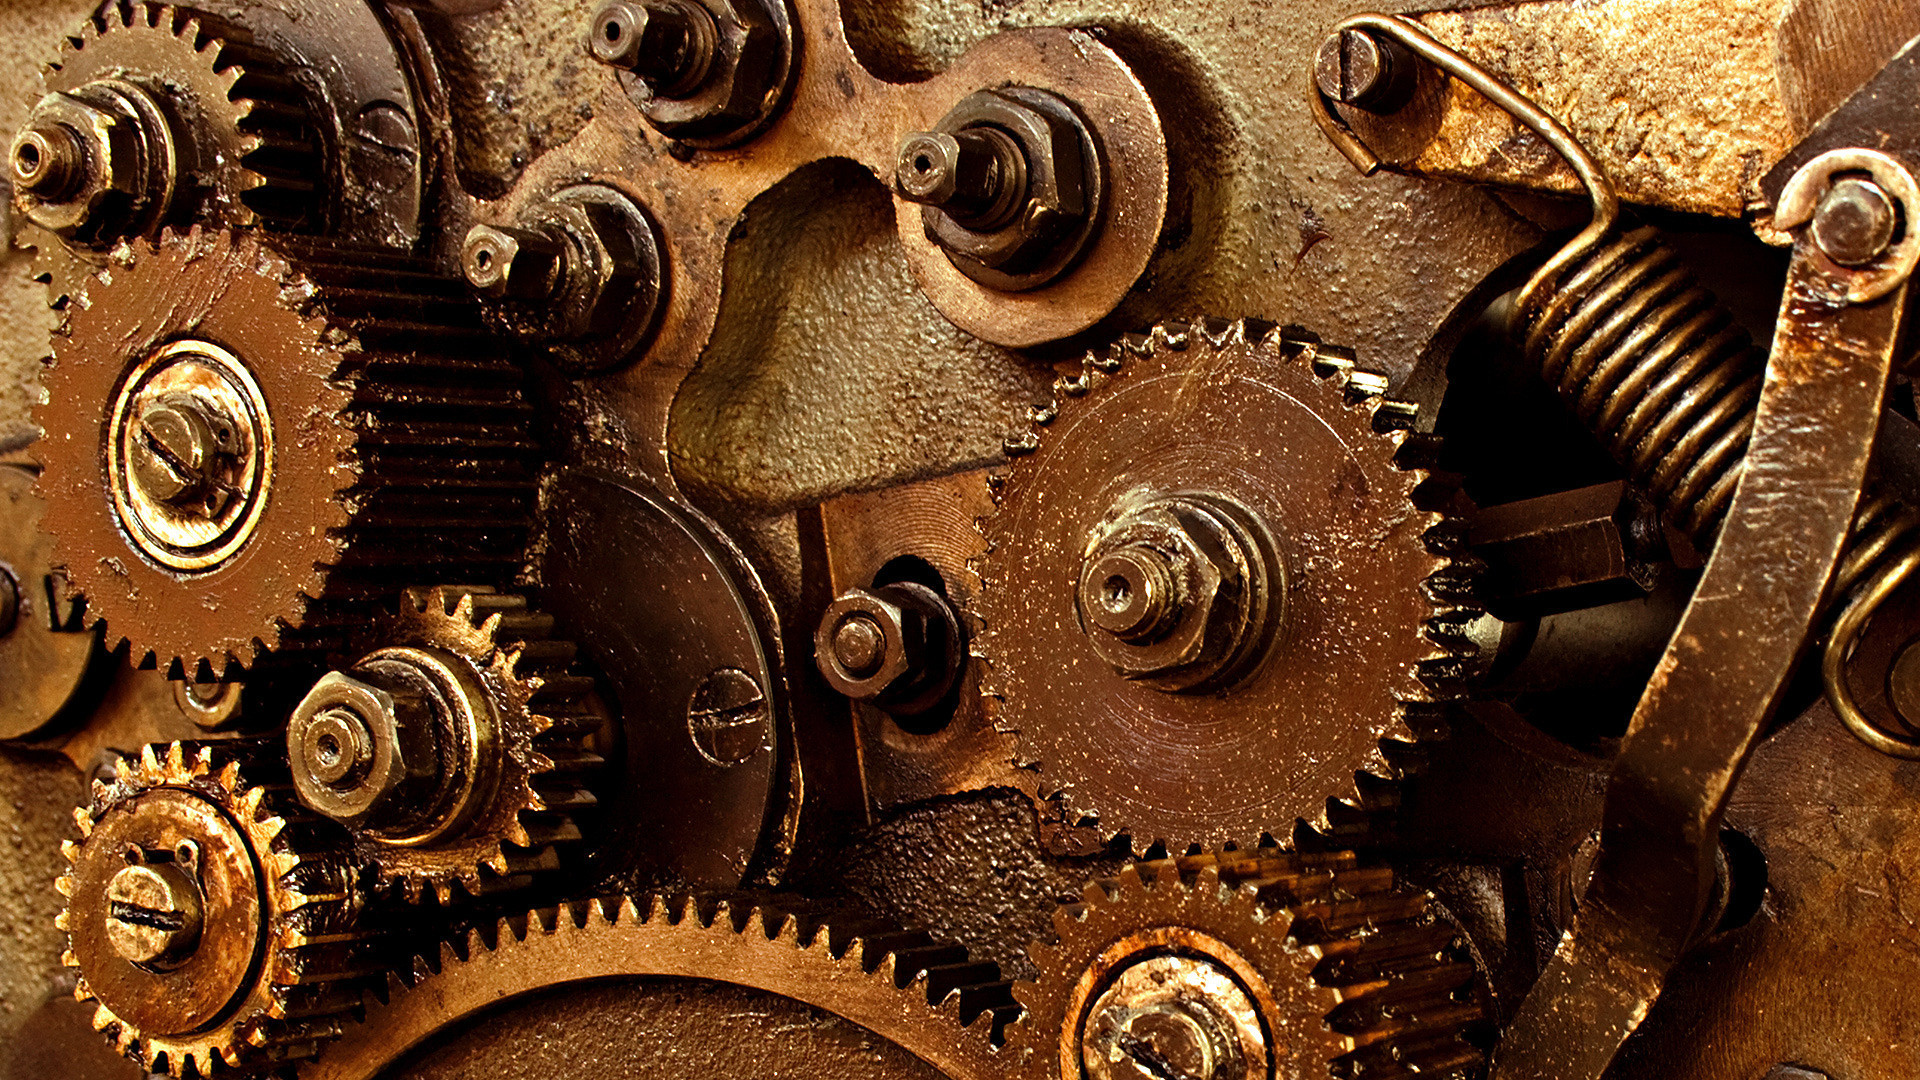 1920x1080 Search Results for “steampunk wallpaper gears” – Adorable Wallpapers